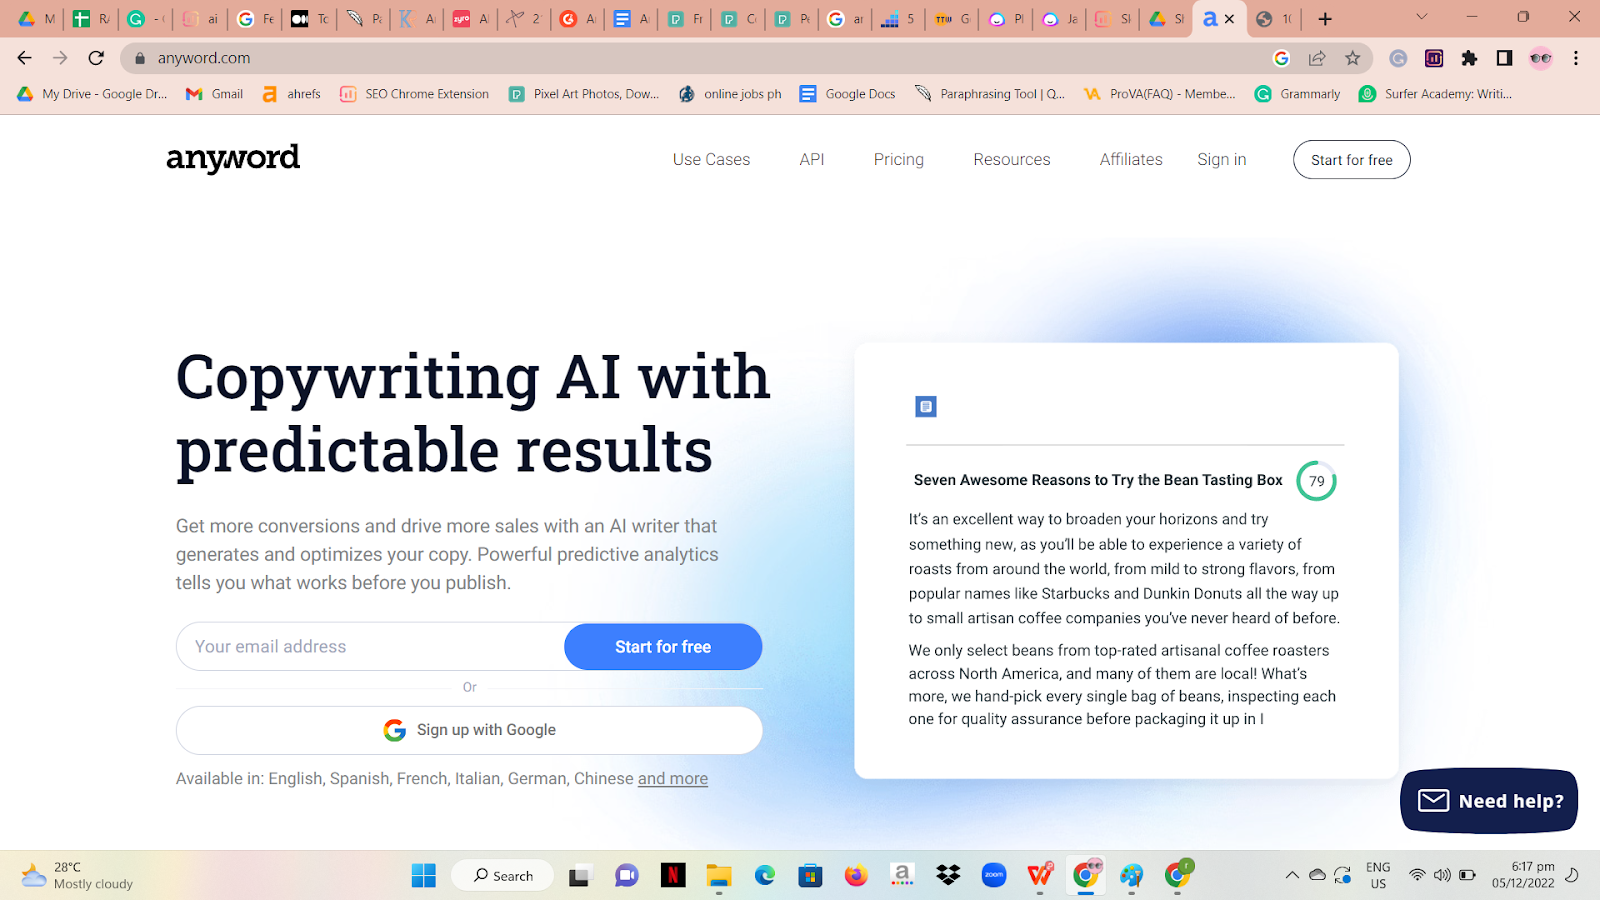 Any words AI copywriting tools generate articles content for their customers by combining pre-trained and fine-tuned models such as GPT3, T5, and CTRL.